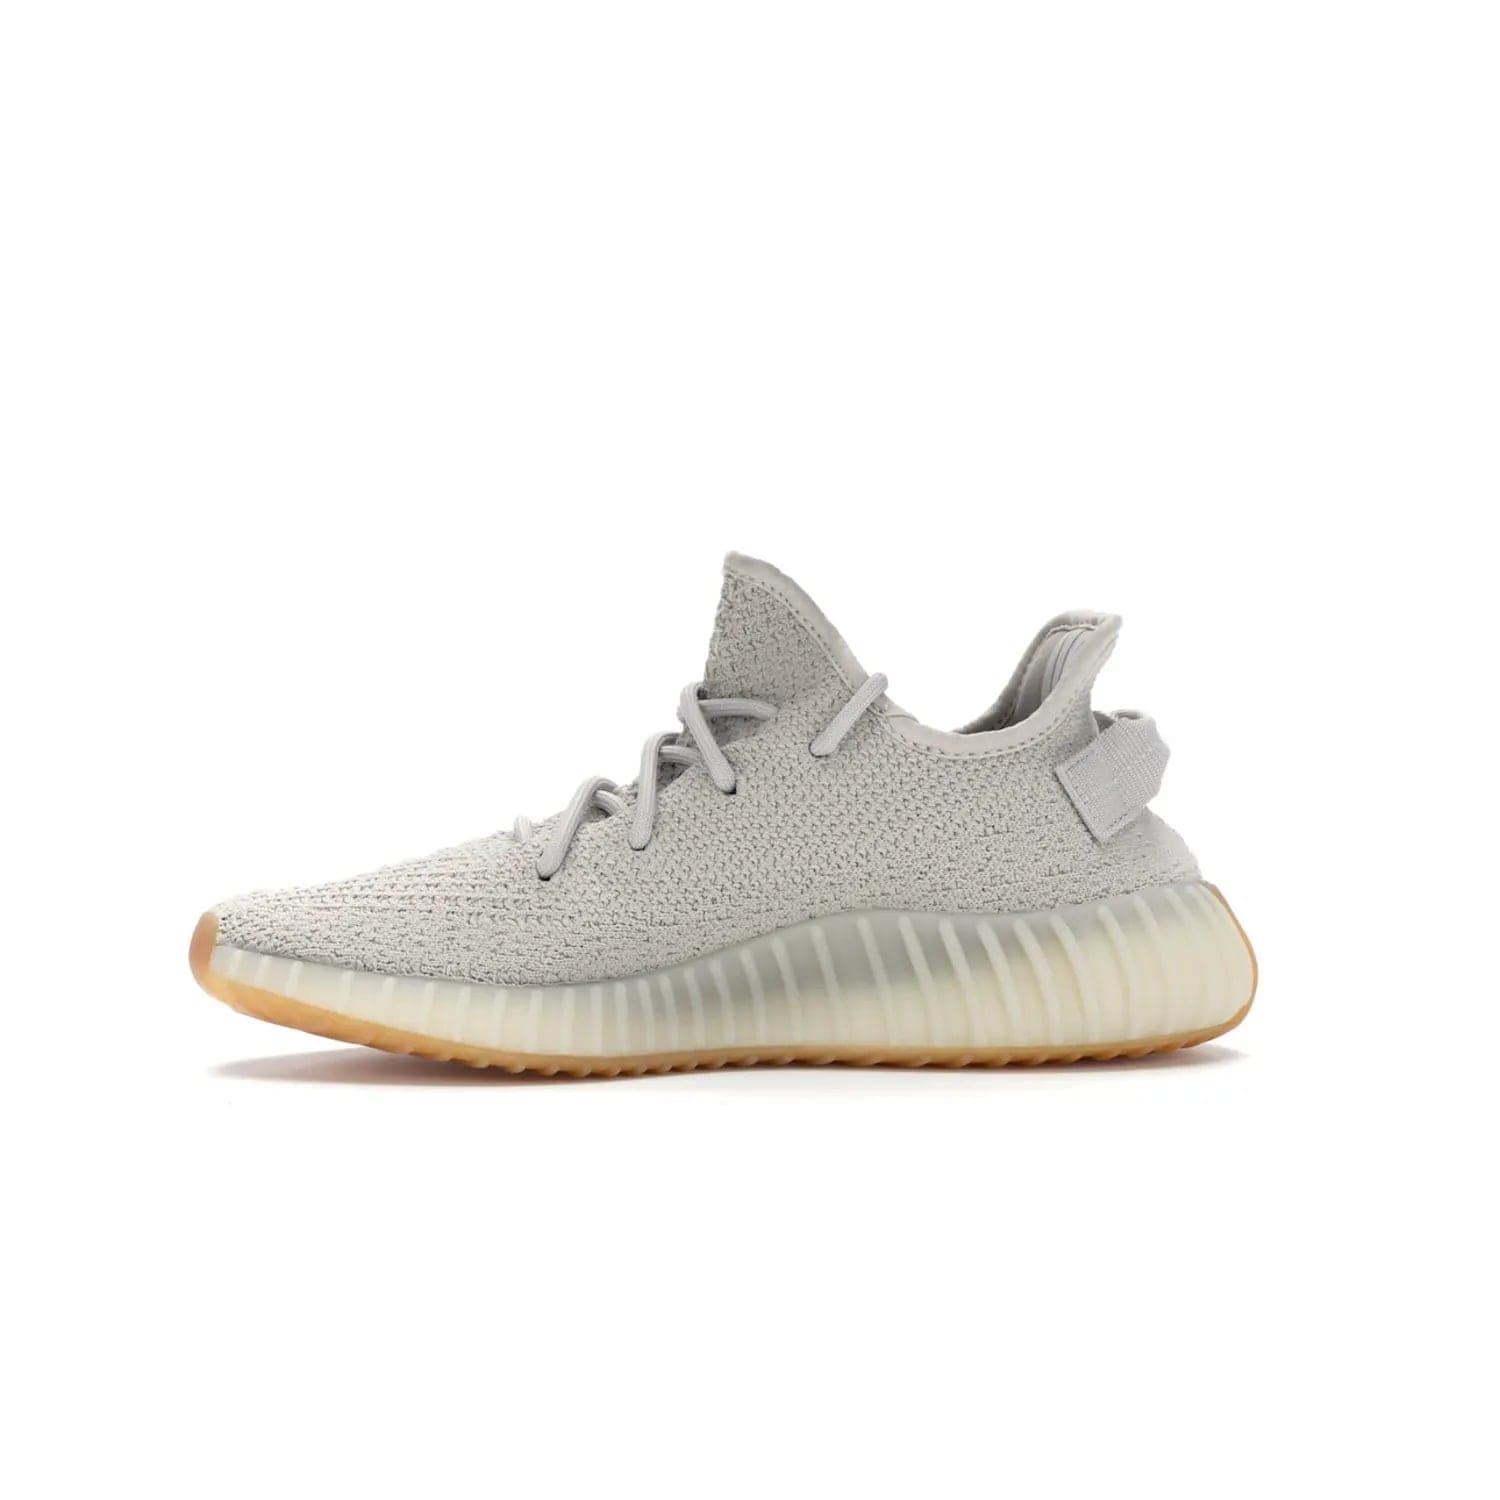 adidas Yeezy Boost 350 V2 Sesame - Image 19 - Only at www.BallersClubKickz.com - Introducing the adidas Yeezy Boost 350 V2 Sesame. Featuring a sesame upper, midsole and gum sole for a sleek silhouette. Cop the stylish sneaker released in November 2018.